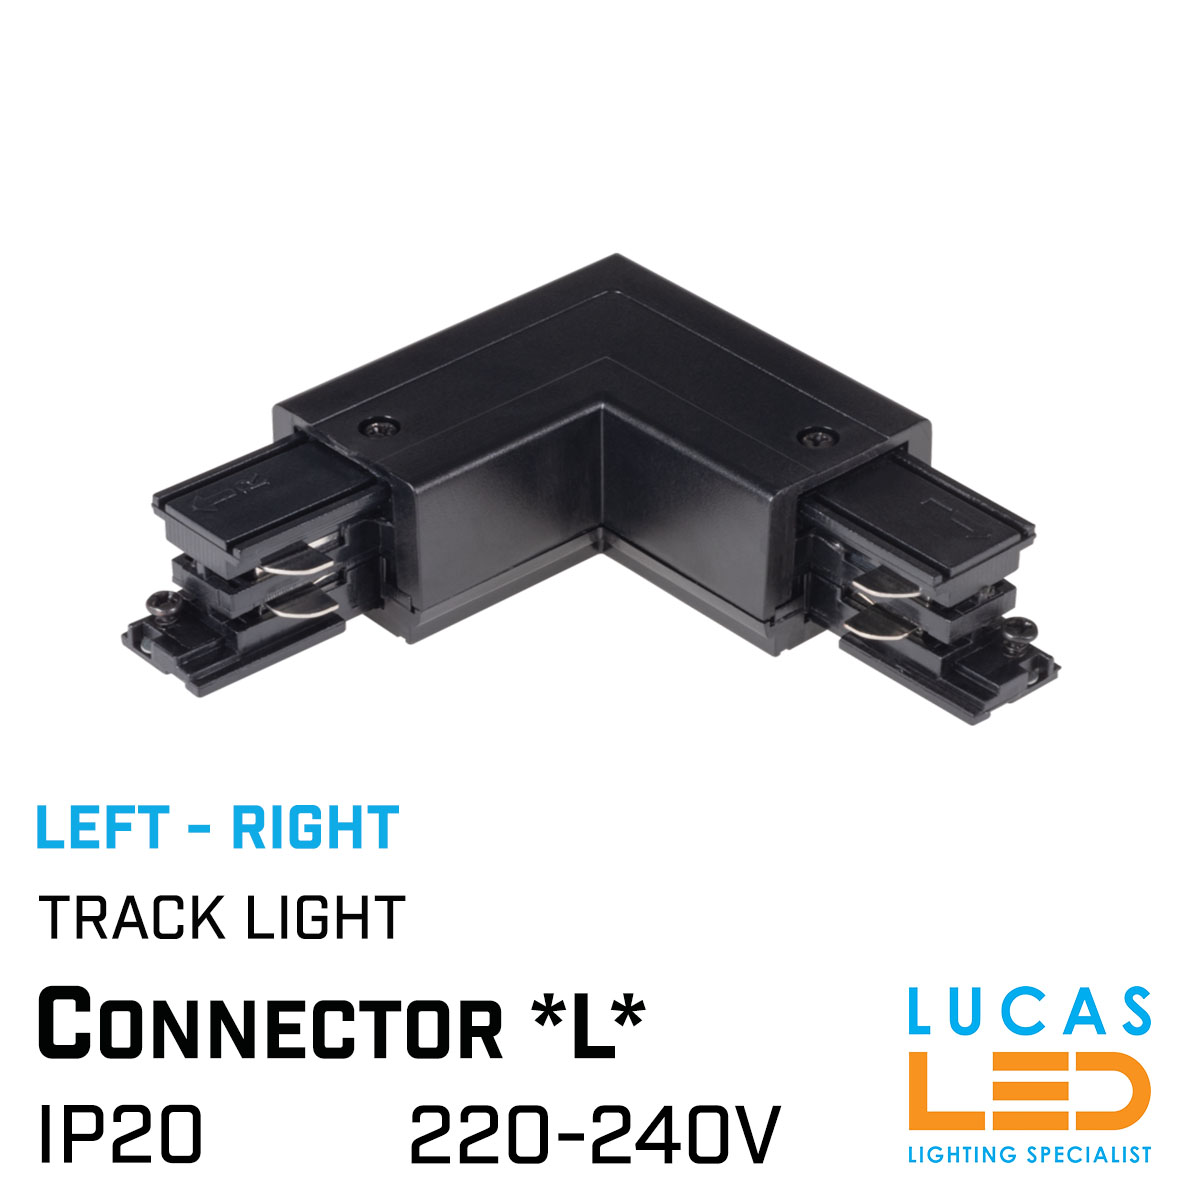 CONNECTOR - L - LEFT - RIGHT - for Rail - LED Track Lighting system - 3-phase - 3 circuit - LR - Black